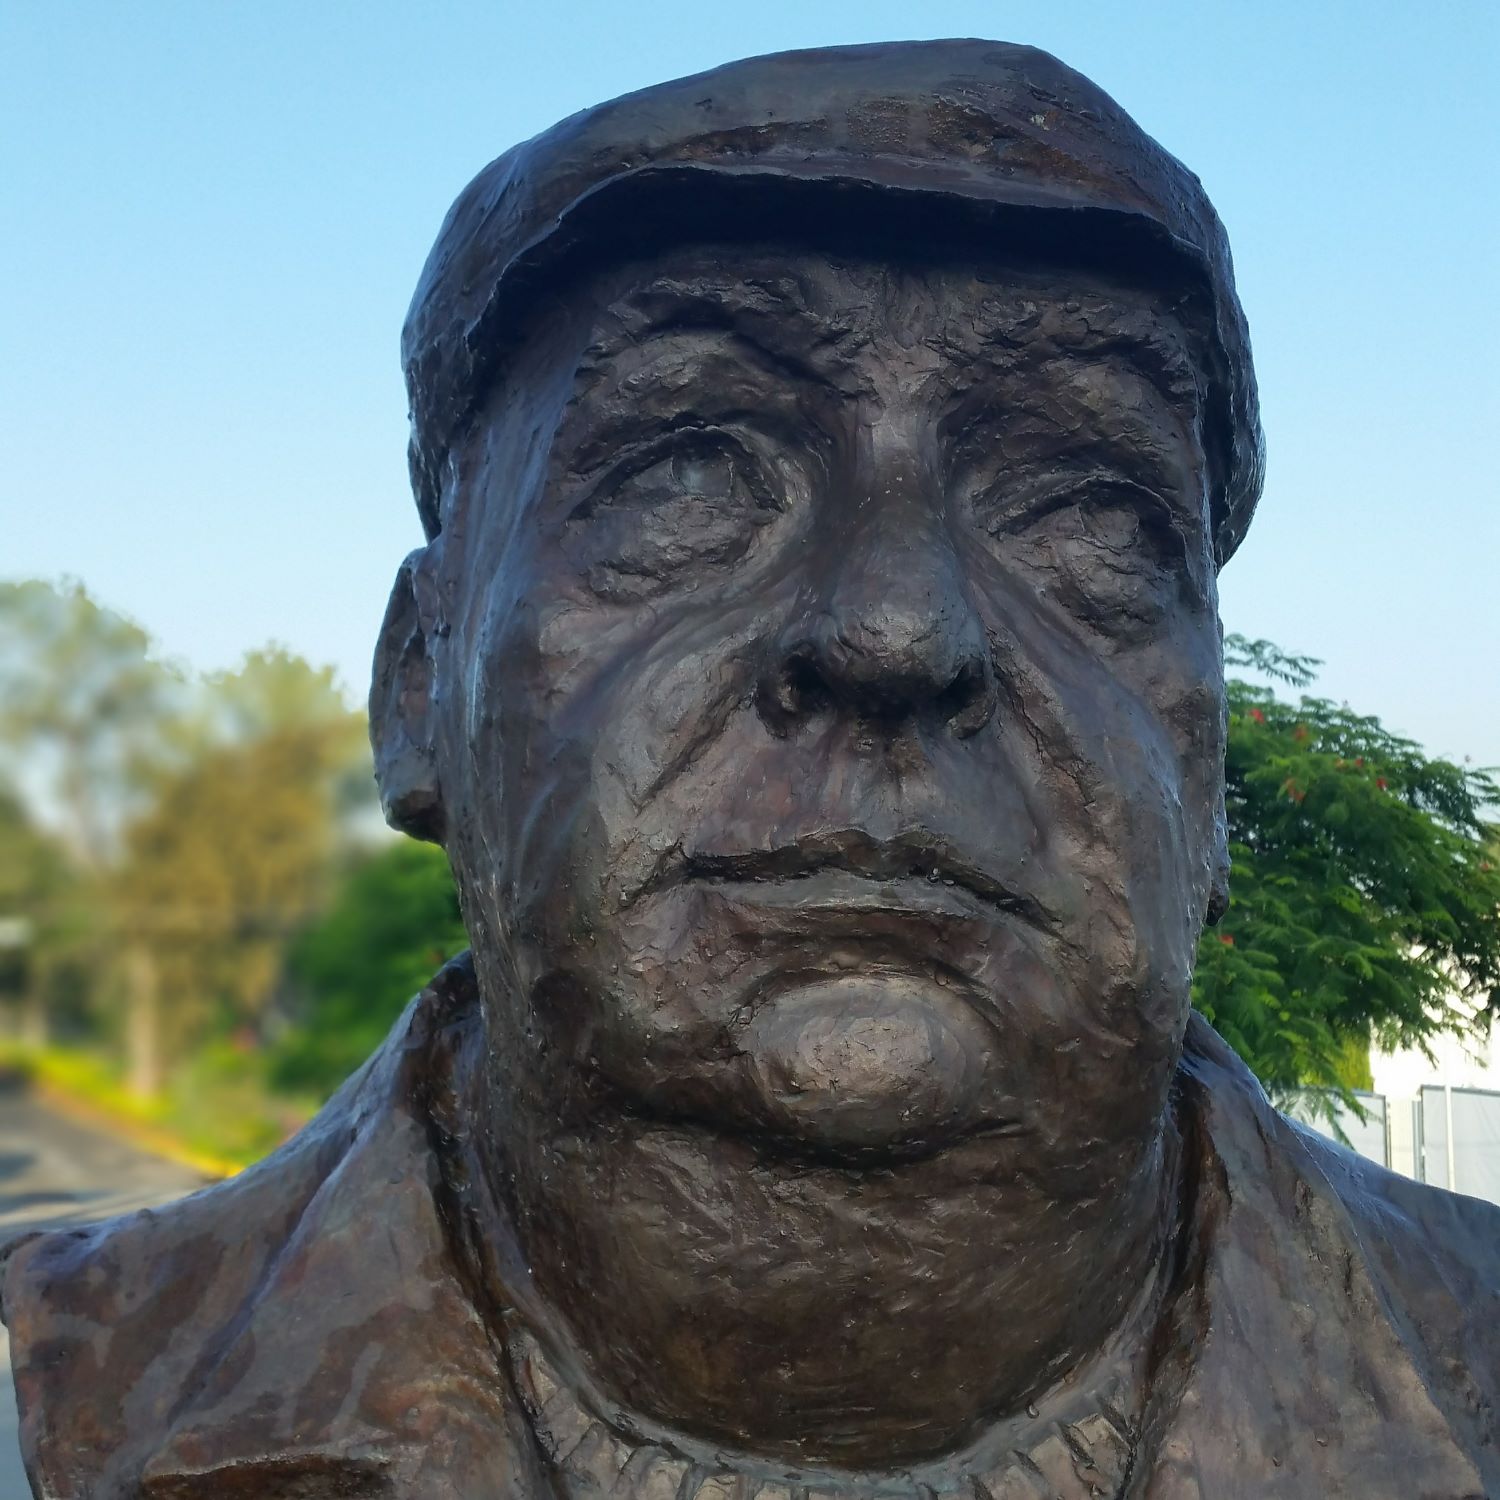 11-astonishing-facts-about-the-pablo-neruda-statue